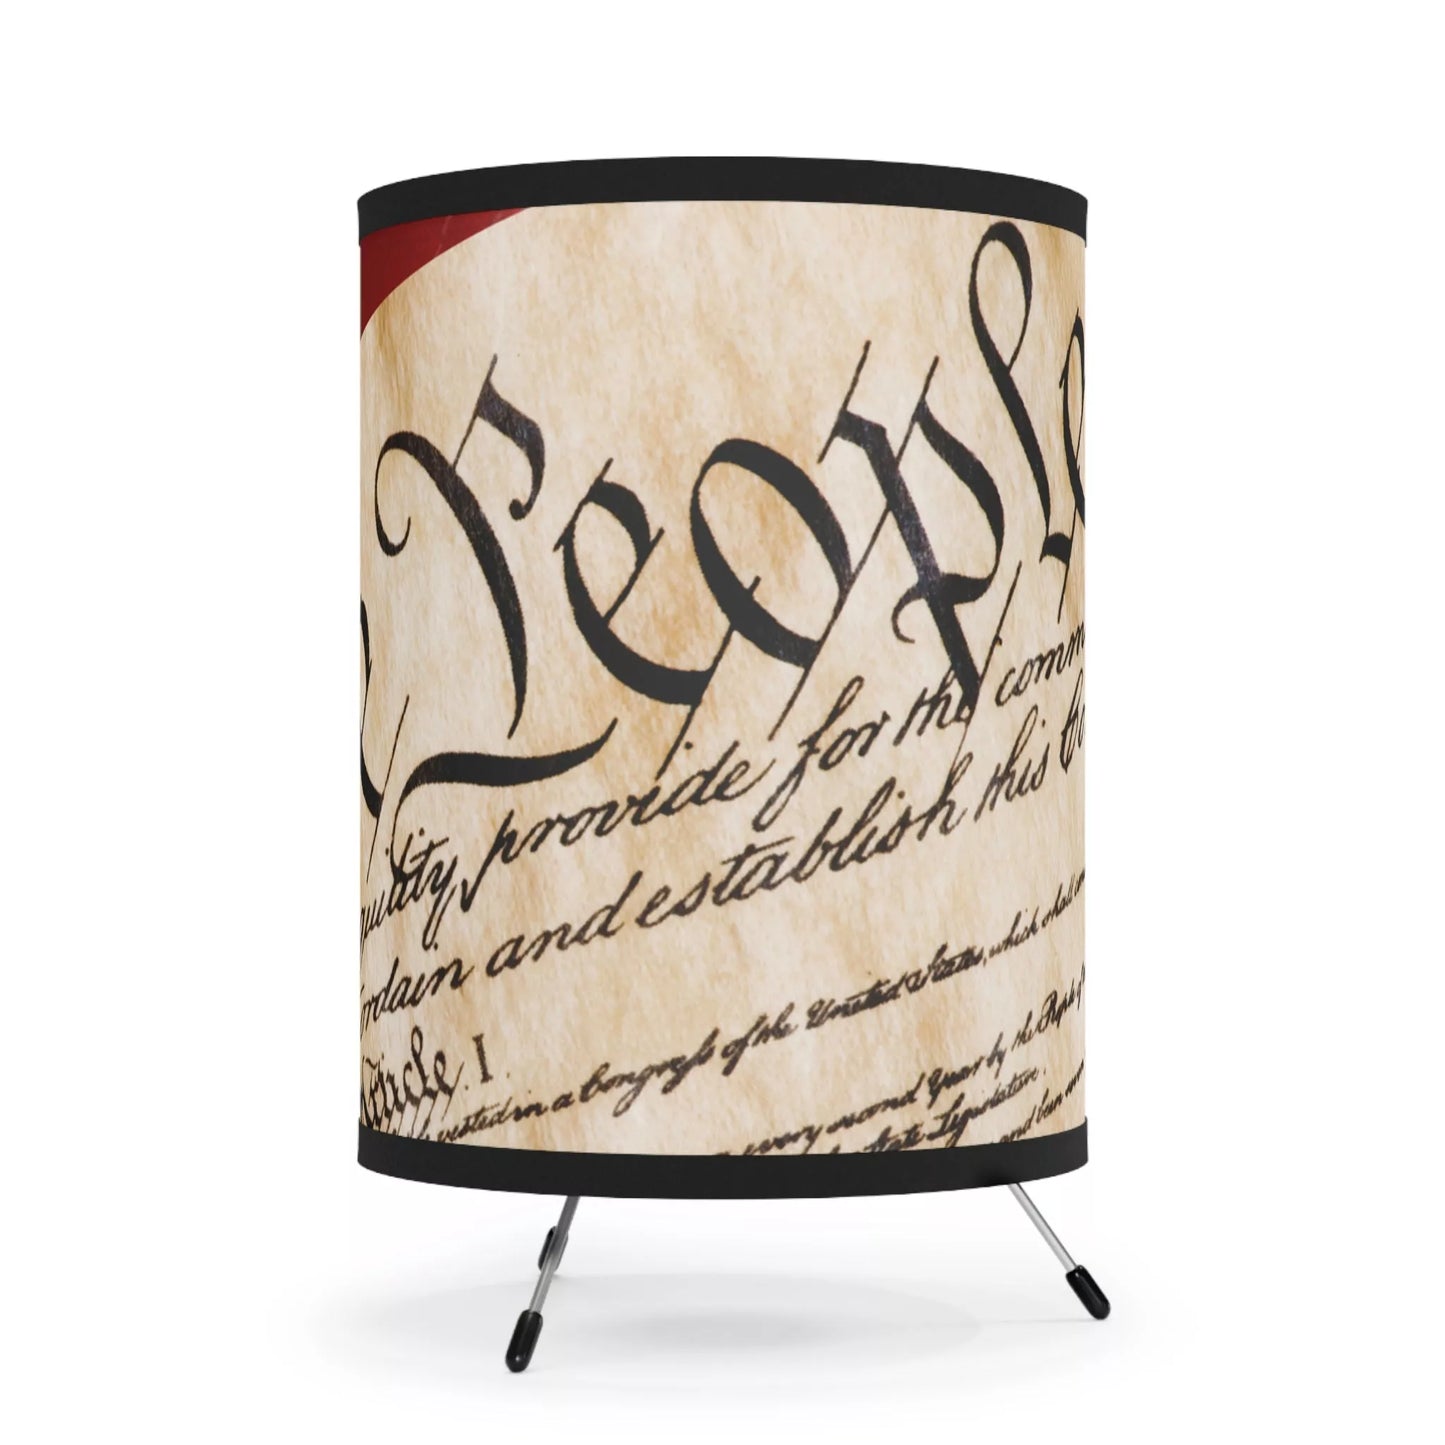 We The People Constitution Tripod Lamp with High-Res Printed Shade, US\CA plug